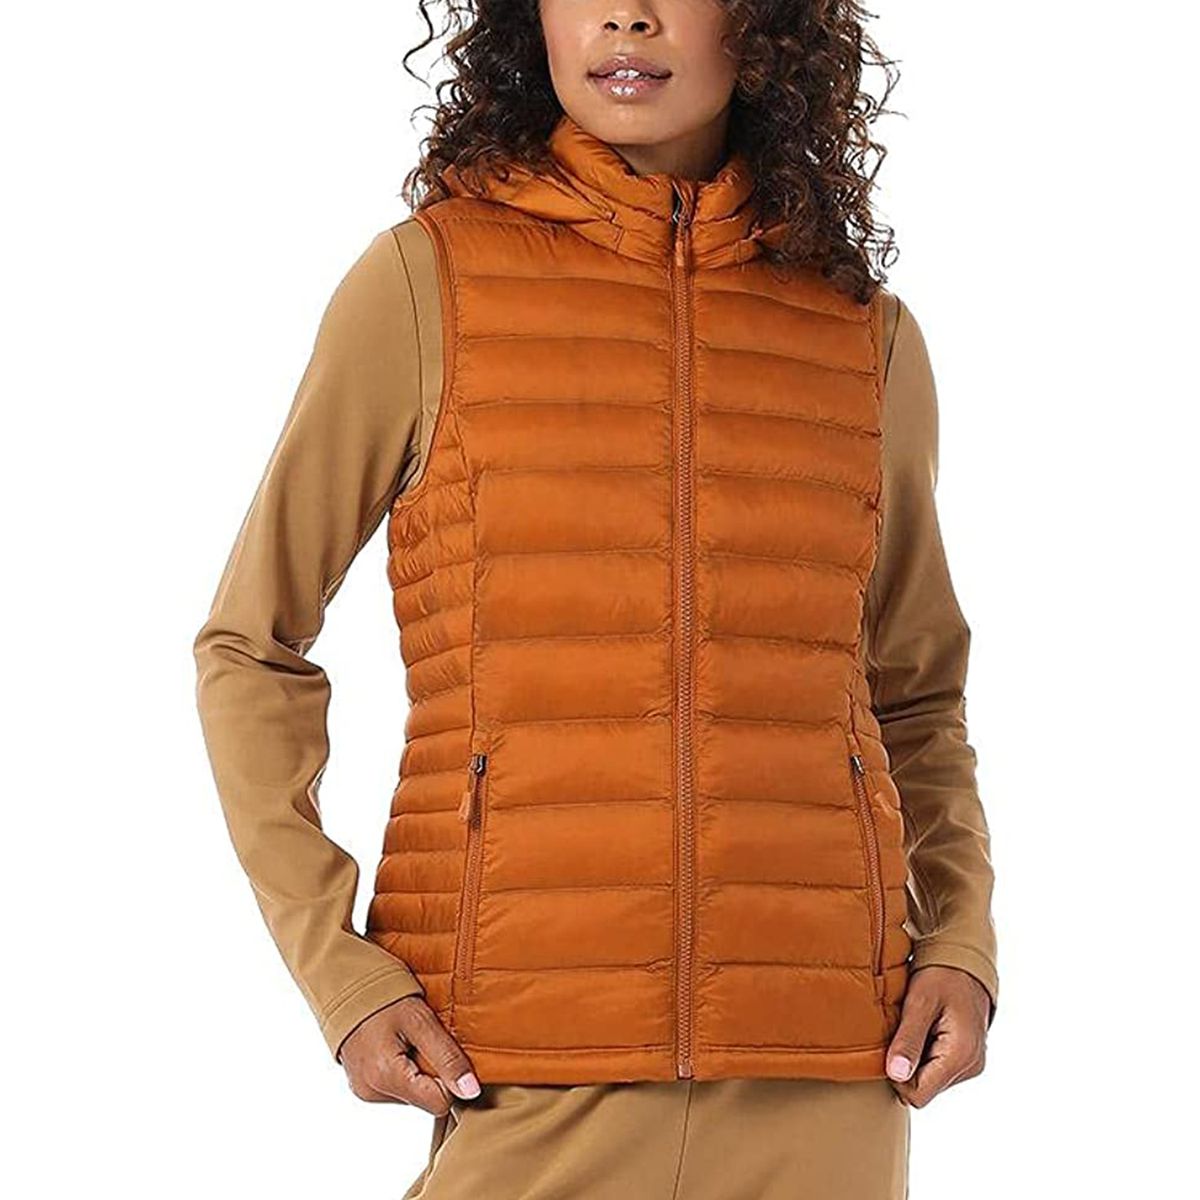 Oprah Loves This Packable Puffer Vest With a Hood